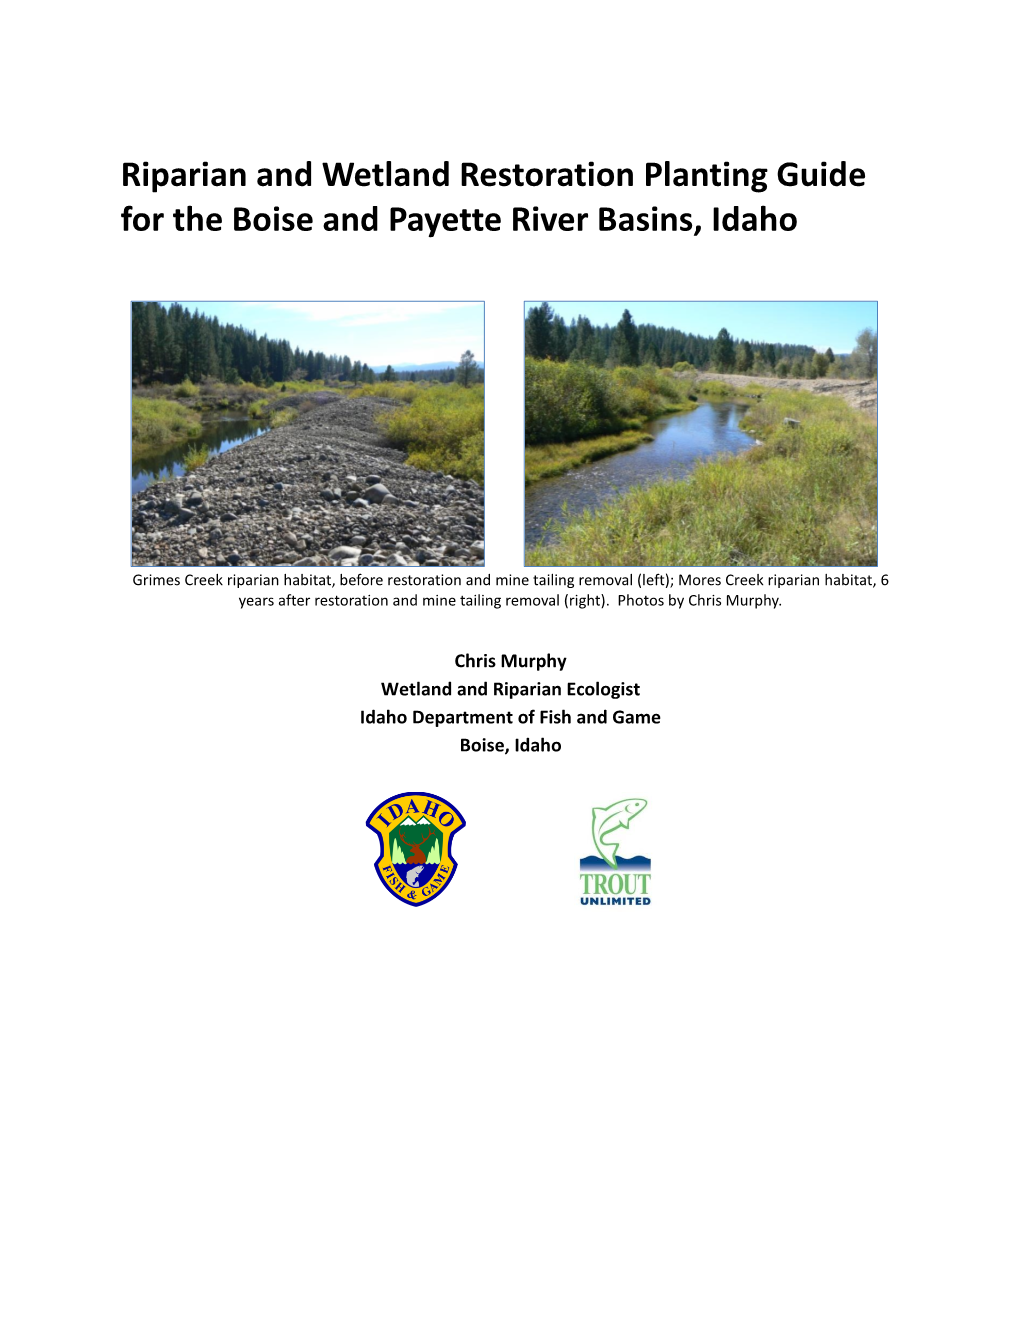 Riparian and Wetland Restoration Planting Guide for the Boise and Payette River Basins, Idaho